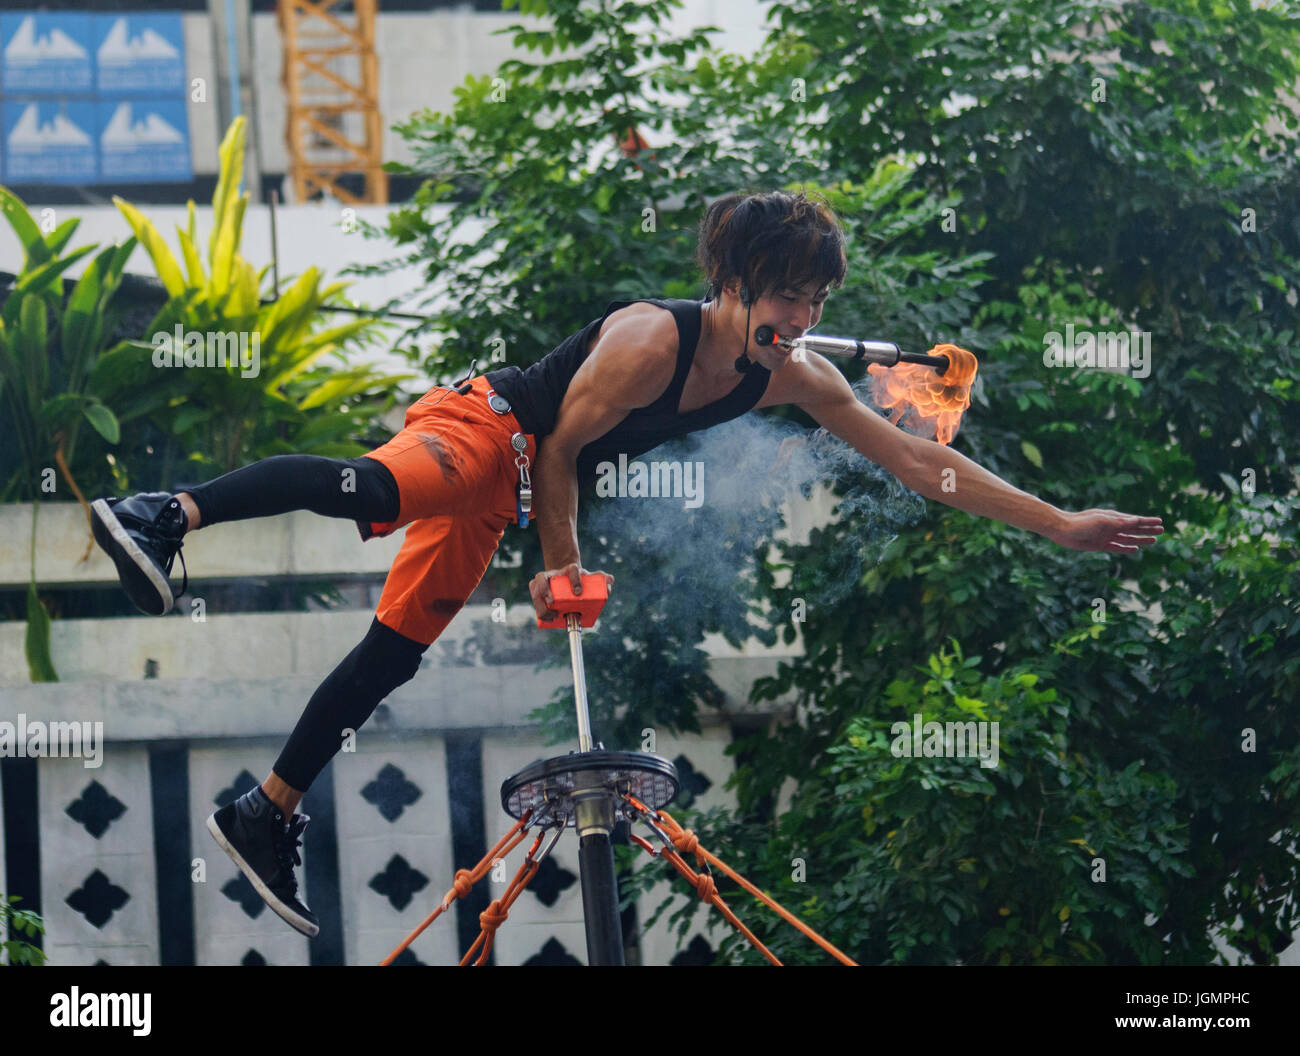 Fire juggling at a street festival in Bangkok, Thailand Stock Photo